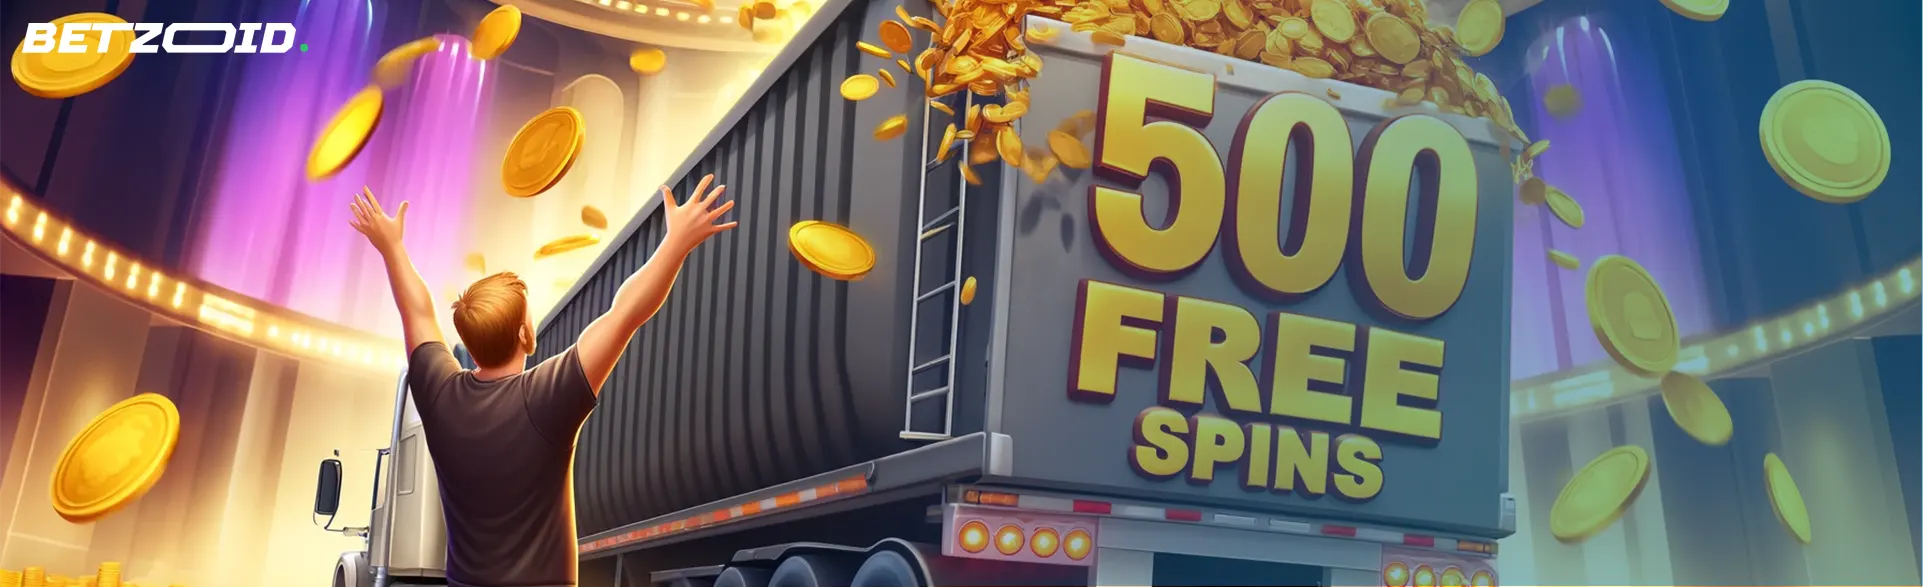 A man celebrating 500 free spins from an online casino.